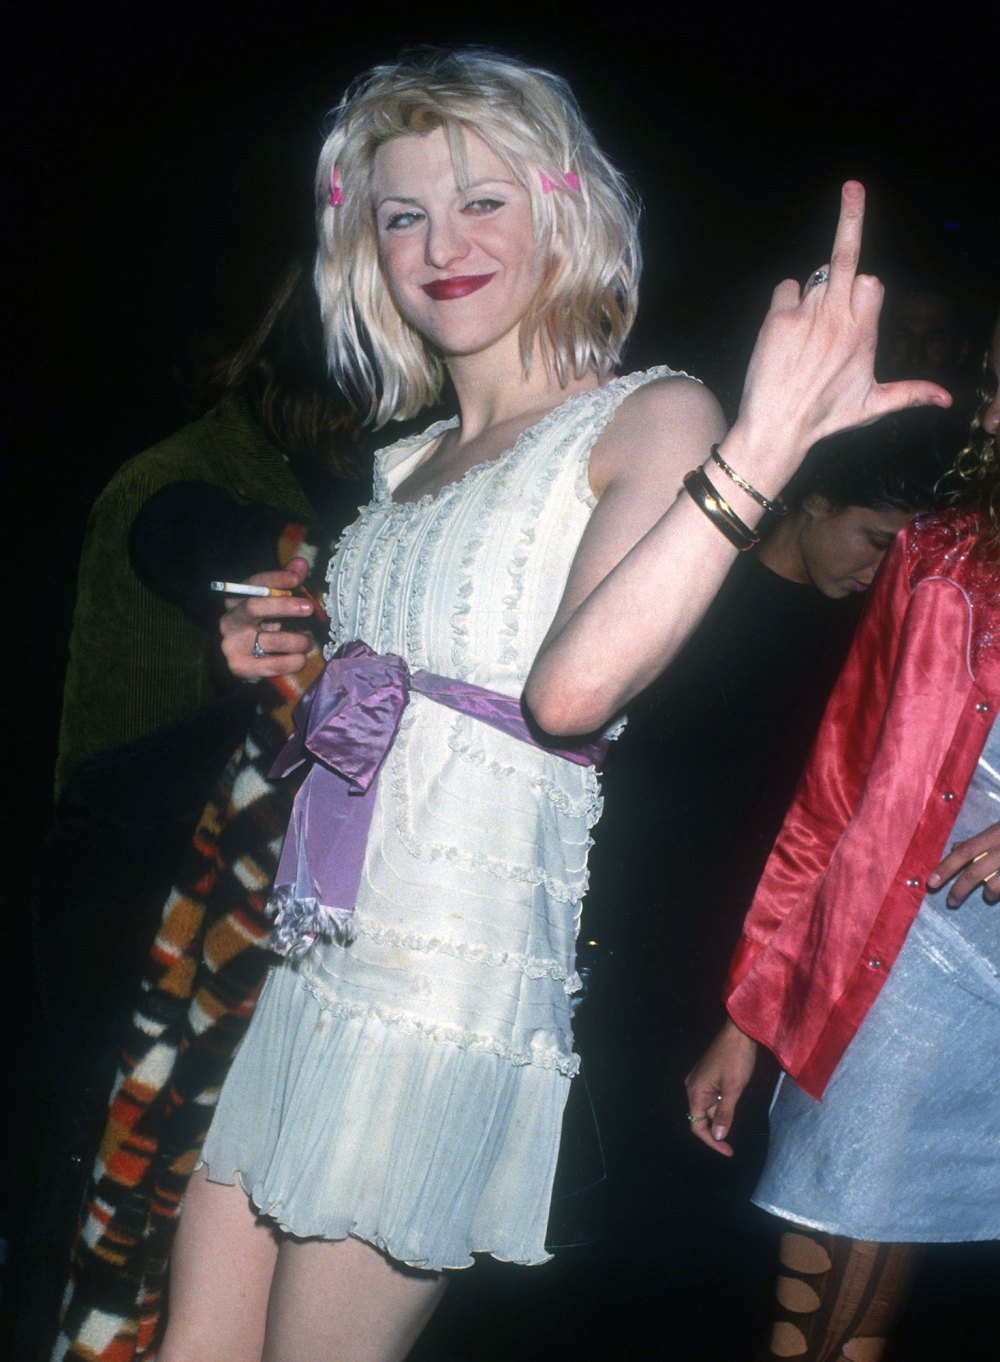 Courtney Love Doesn’t Regret Her Nose Job, Lost Acting Role to Julia Roberts in Satisfaction